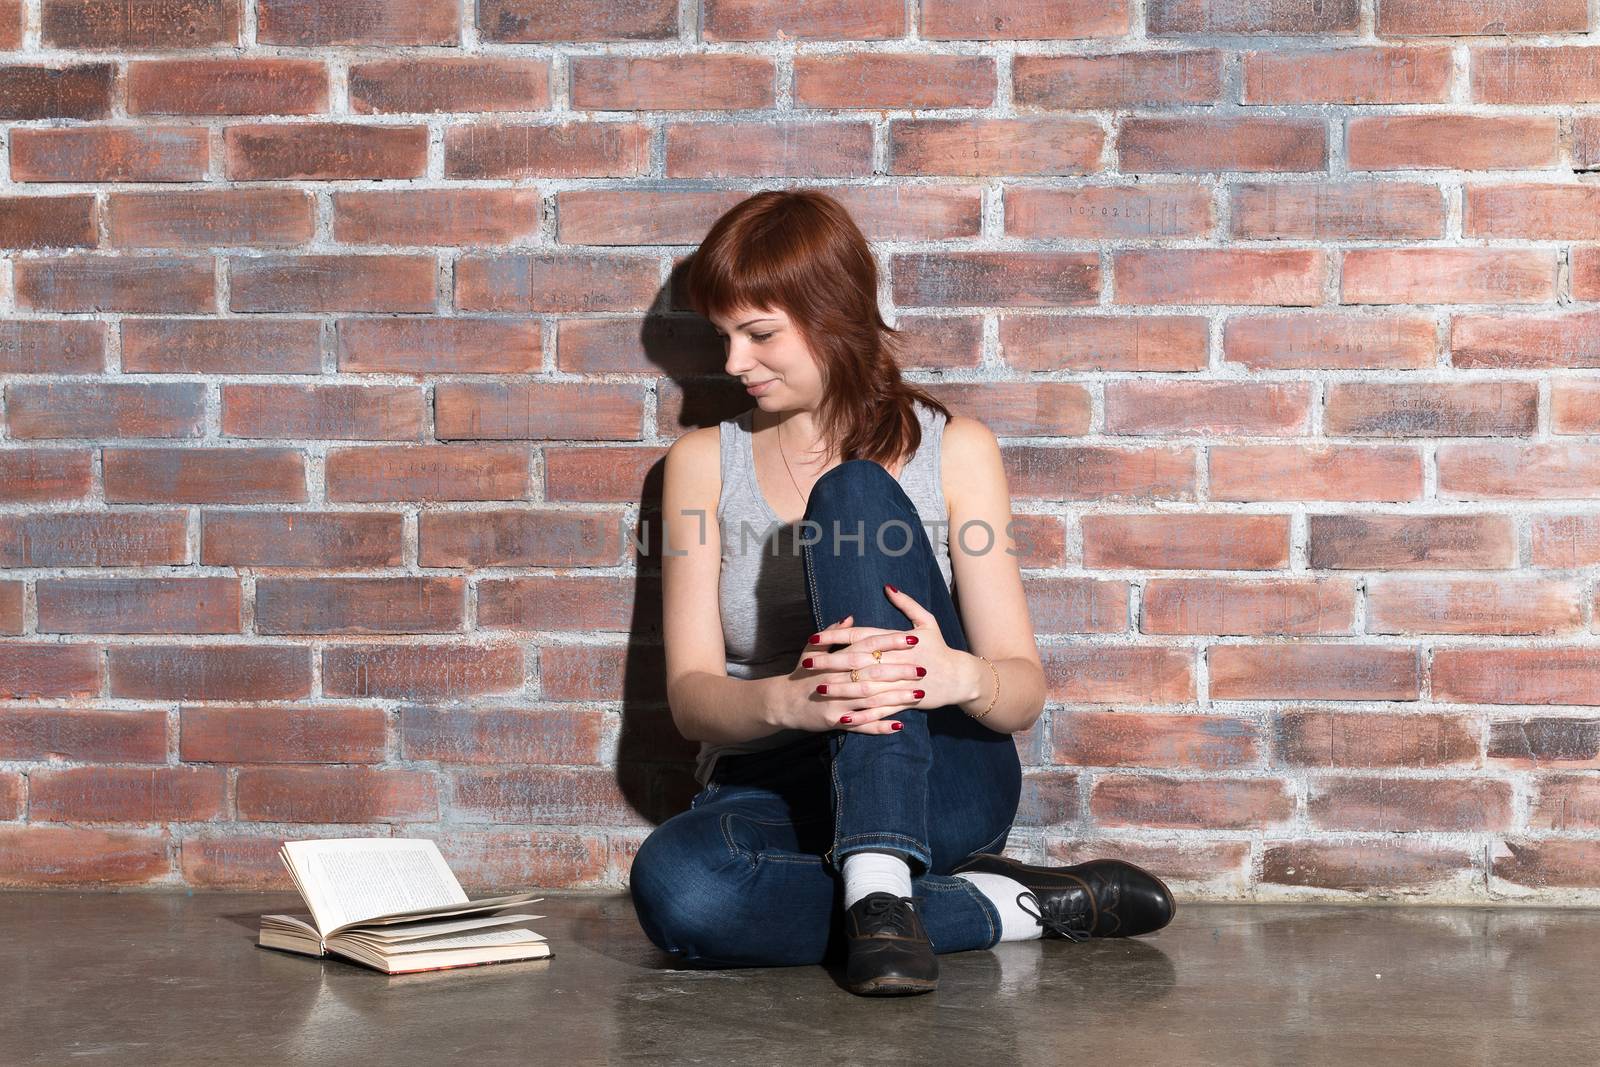 Young beautiful ginger hair woman in blue jeans reading a book while sitting on the floor near red brick wall